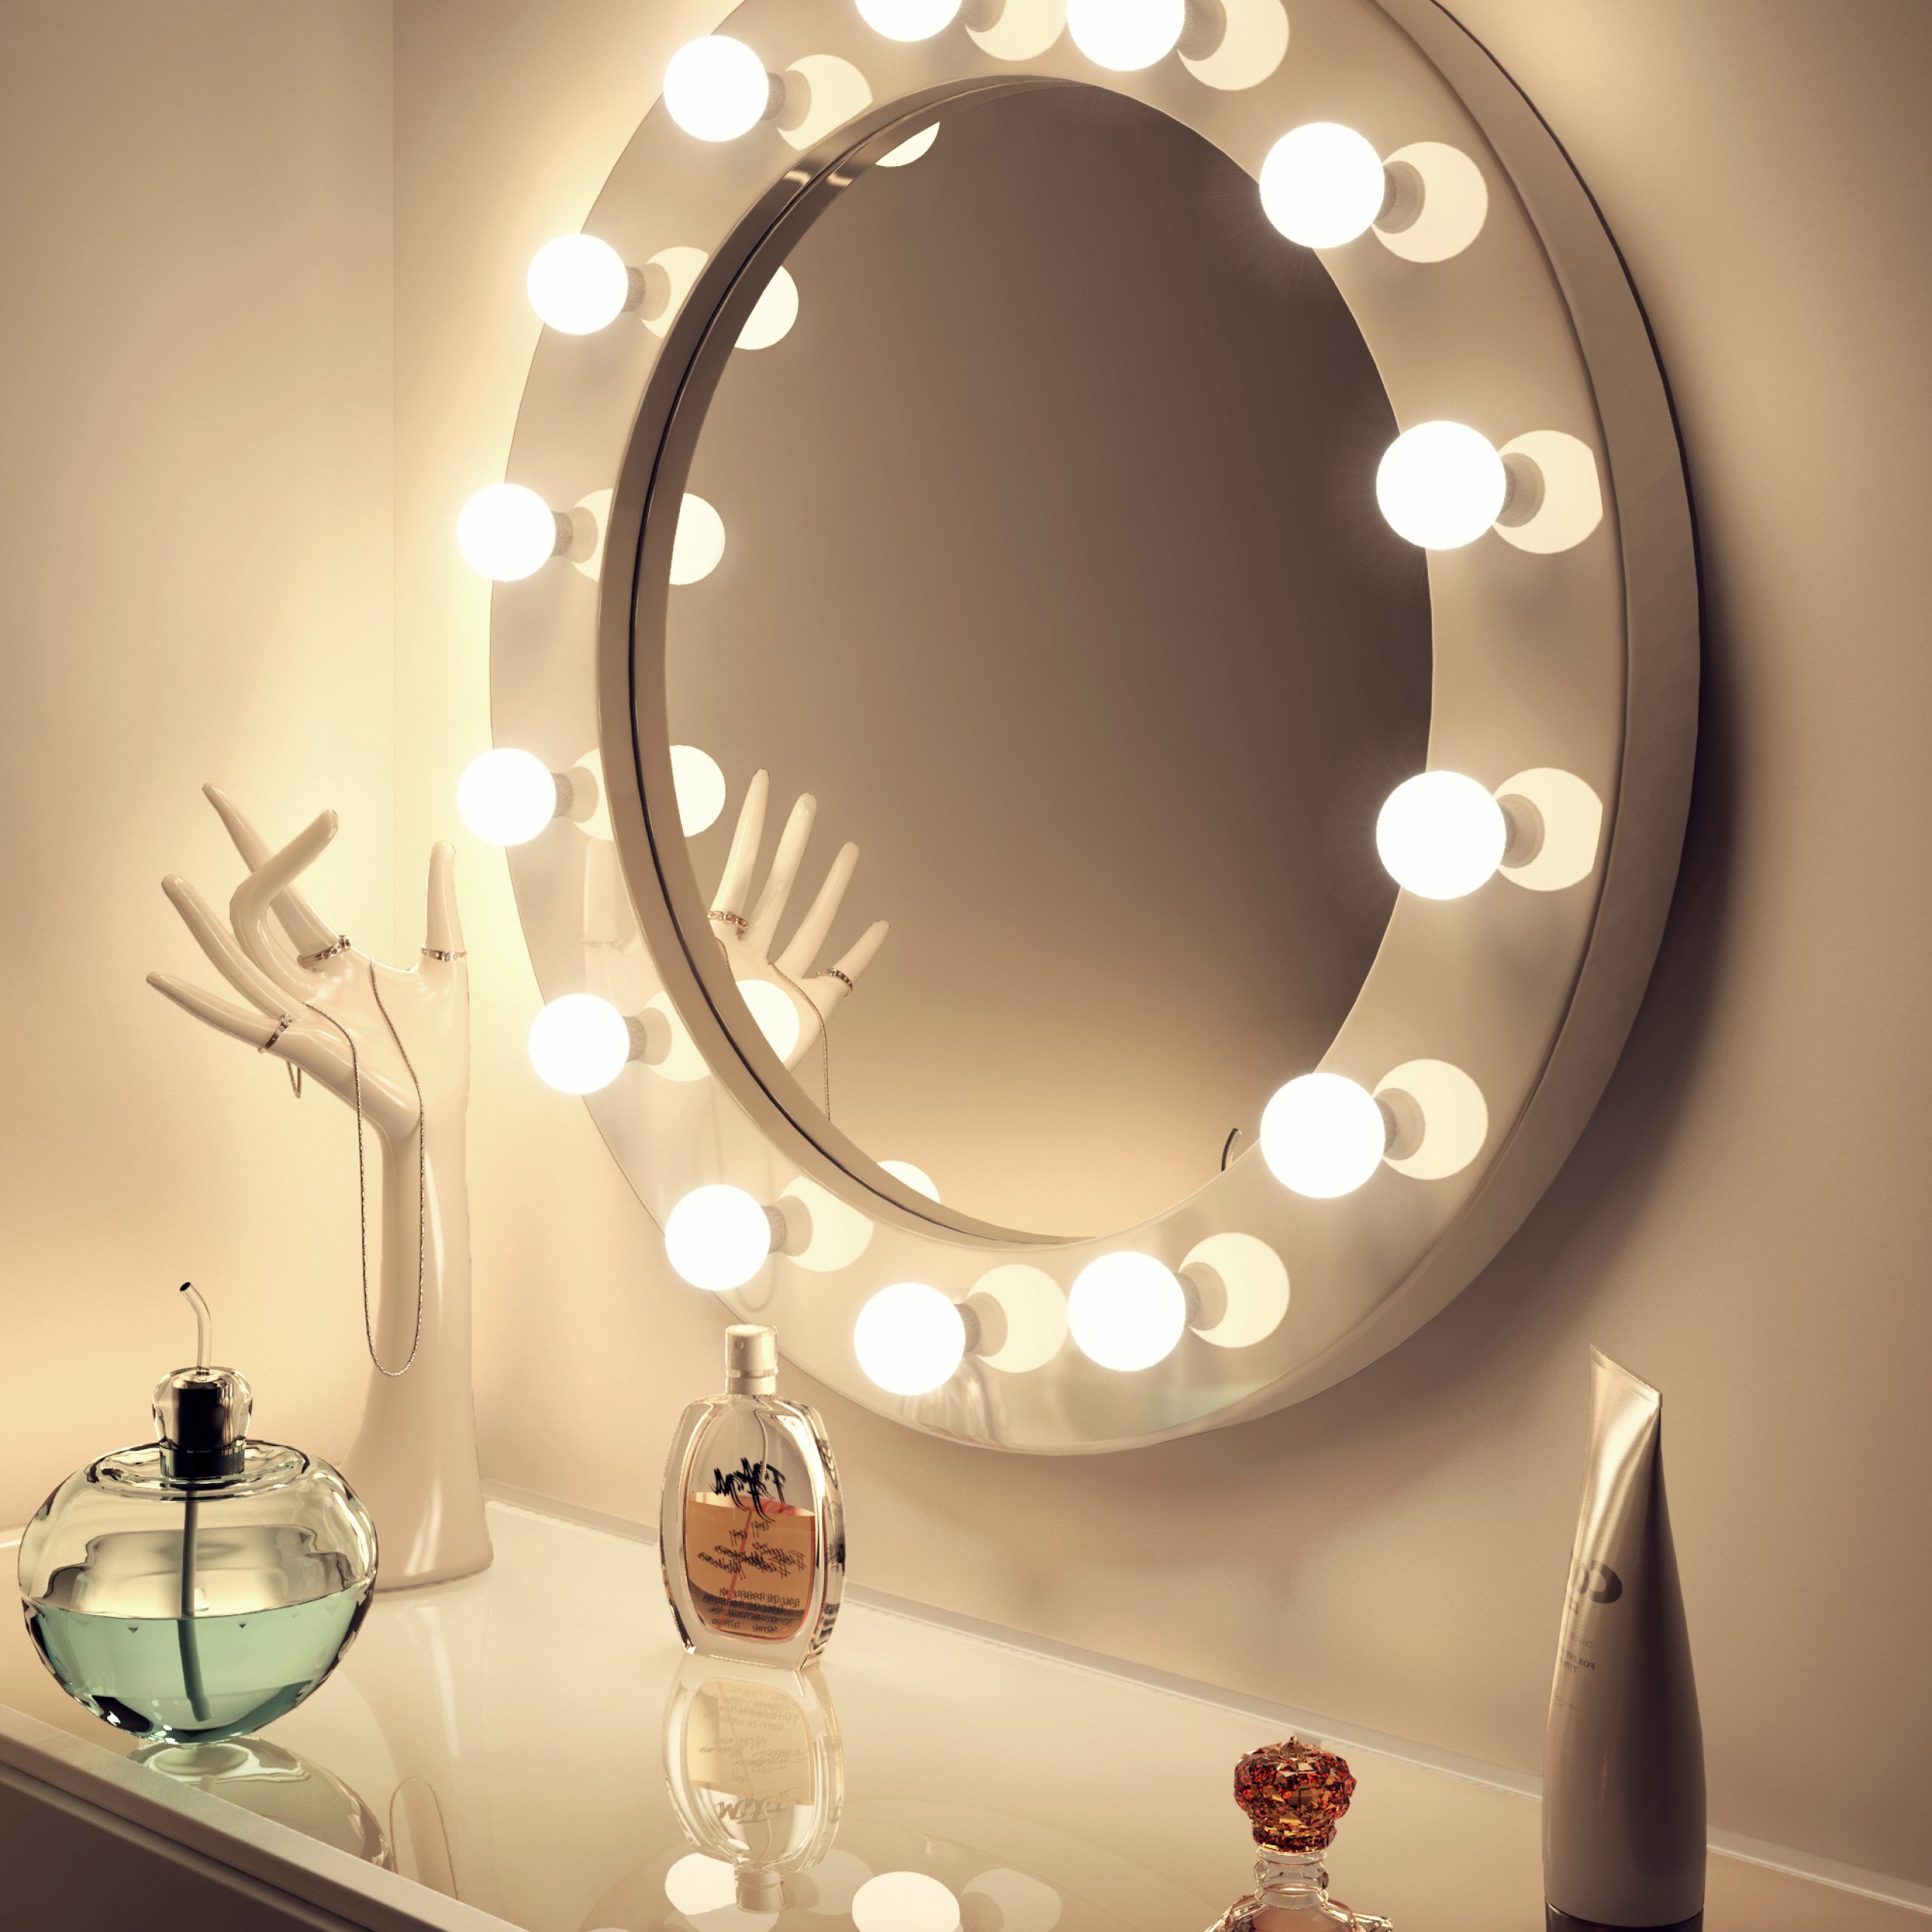 High Wall Mirrors Throughout Most Up To Date Illuminated Mirrors Wall Mounted High Gloss White V2 – Jwc (View 1 of 15)